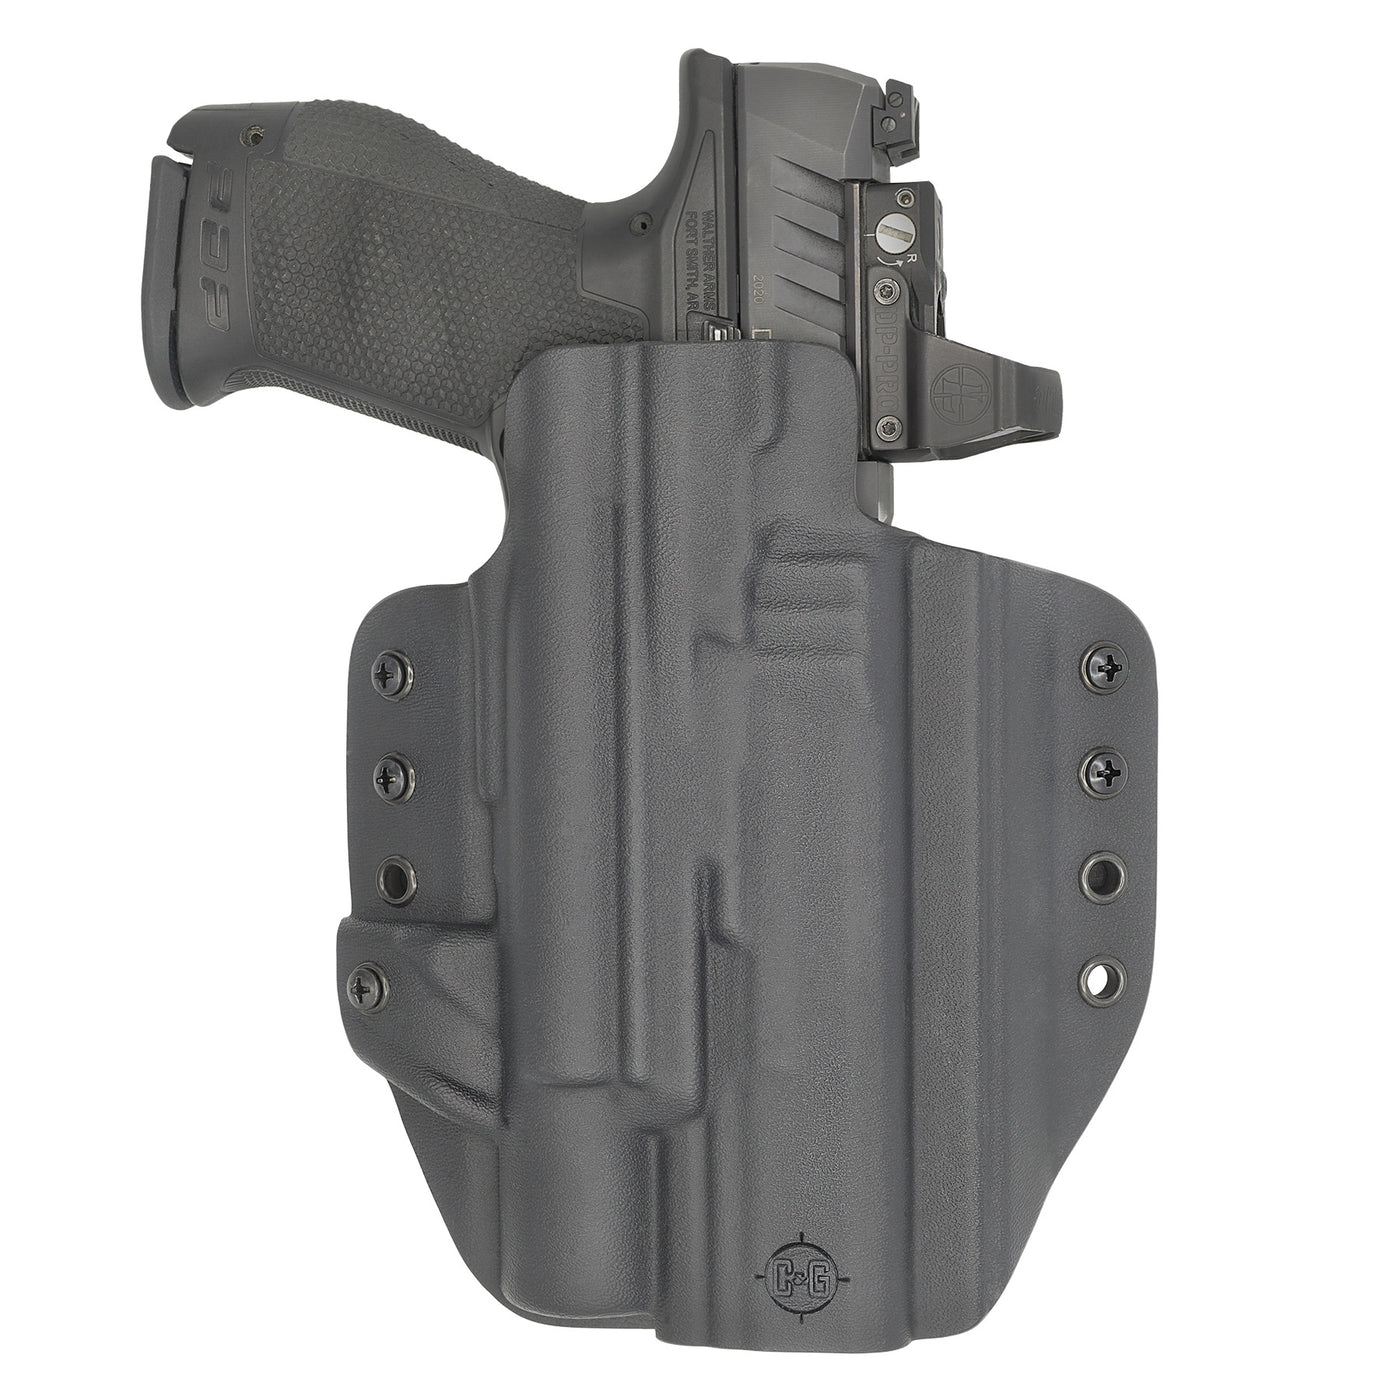 C&G Holsters Quickship OWB Tactical S&W M&P Surefire X300 in holstered position